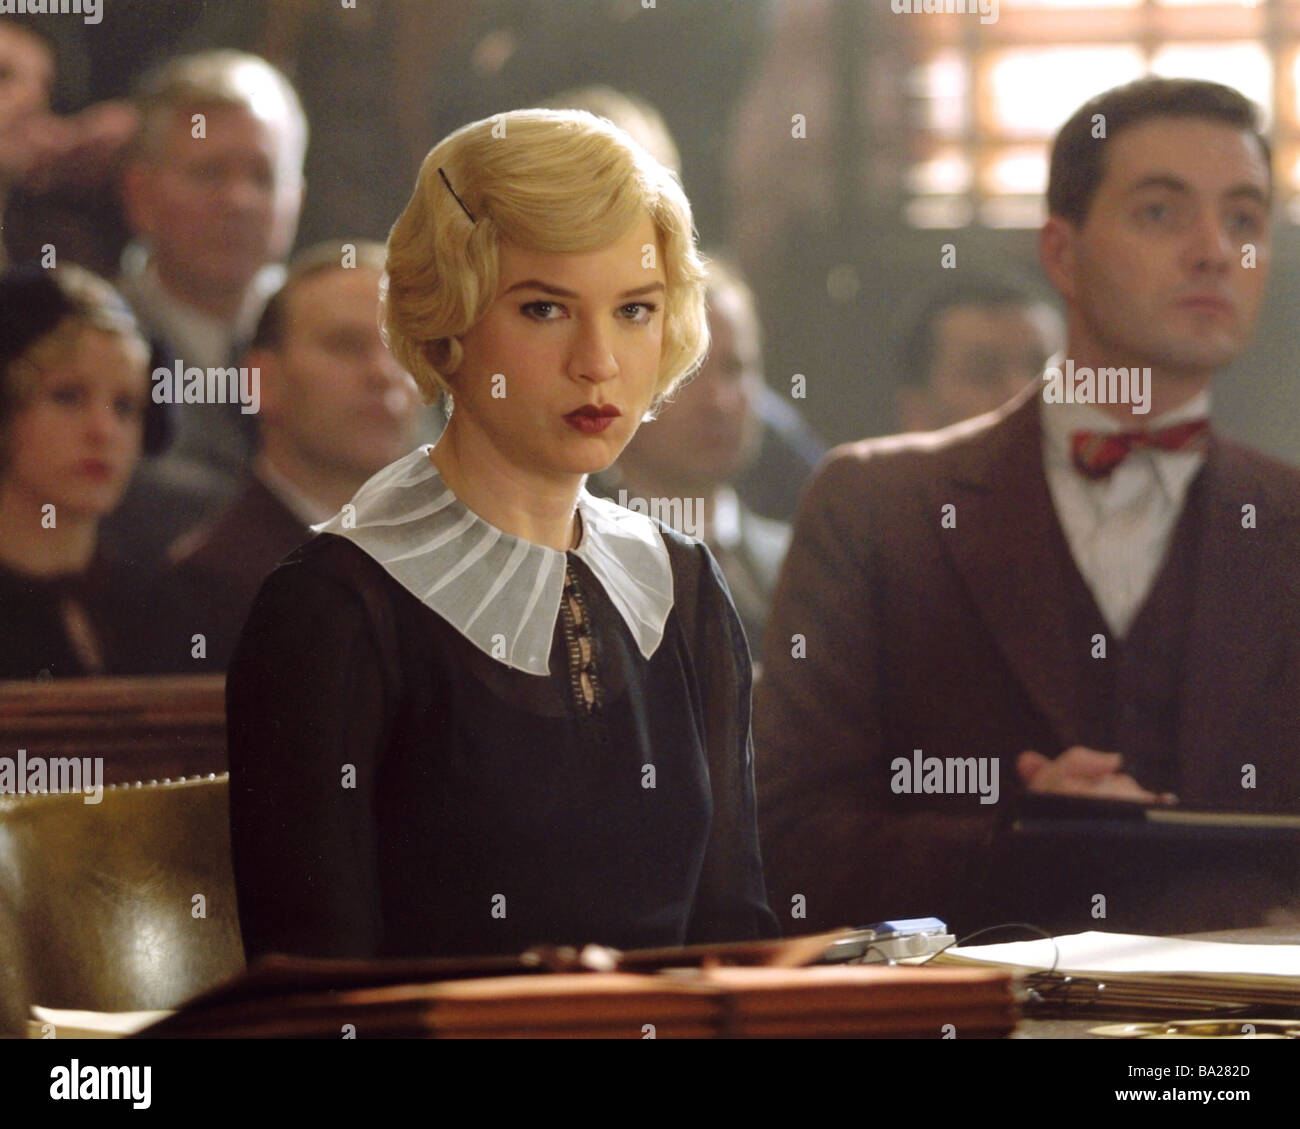 Collection 96+ Pictures Which Actress Plays The Character Roxie Hart In ...